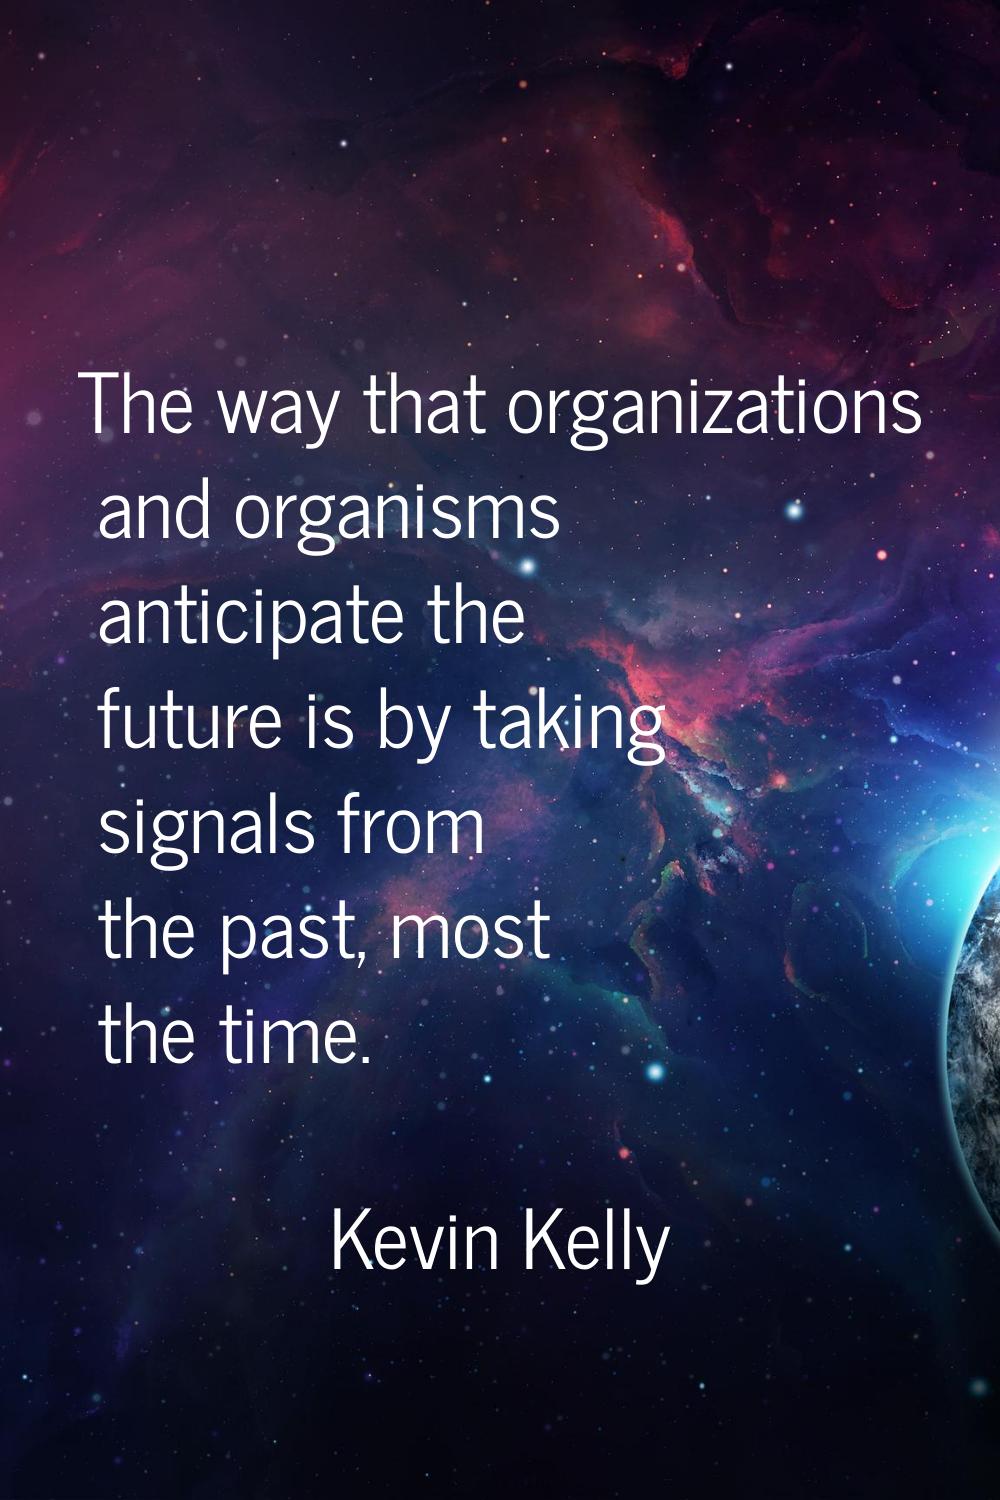 The way that organizations and organisms anticipate the future is by taking signals from the past, 